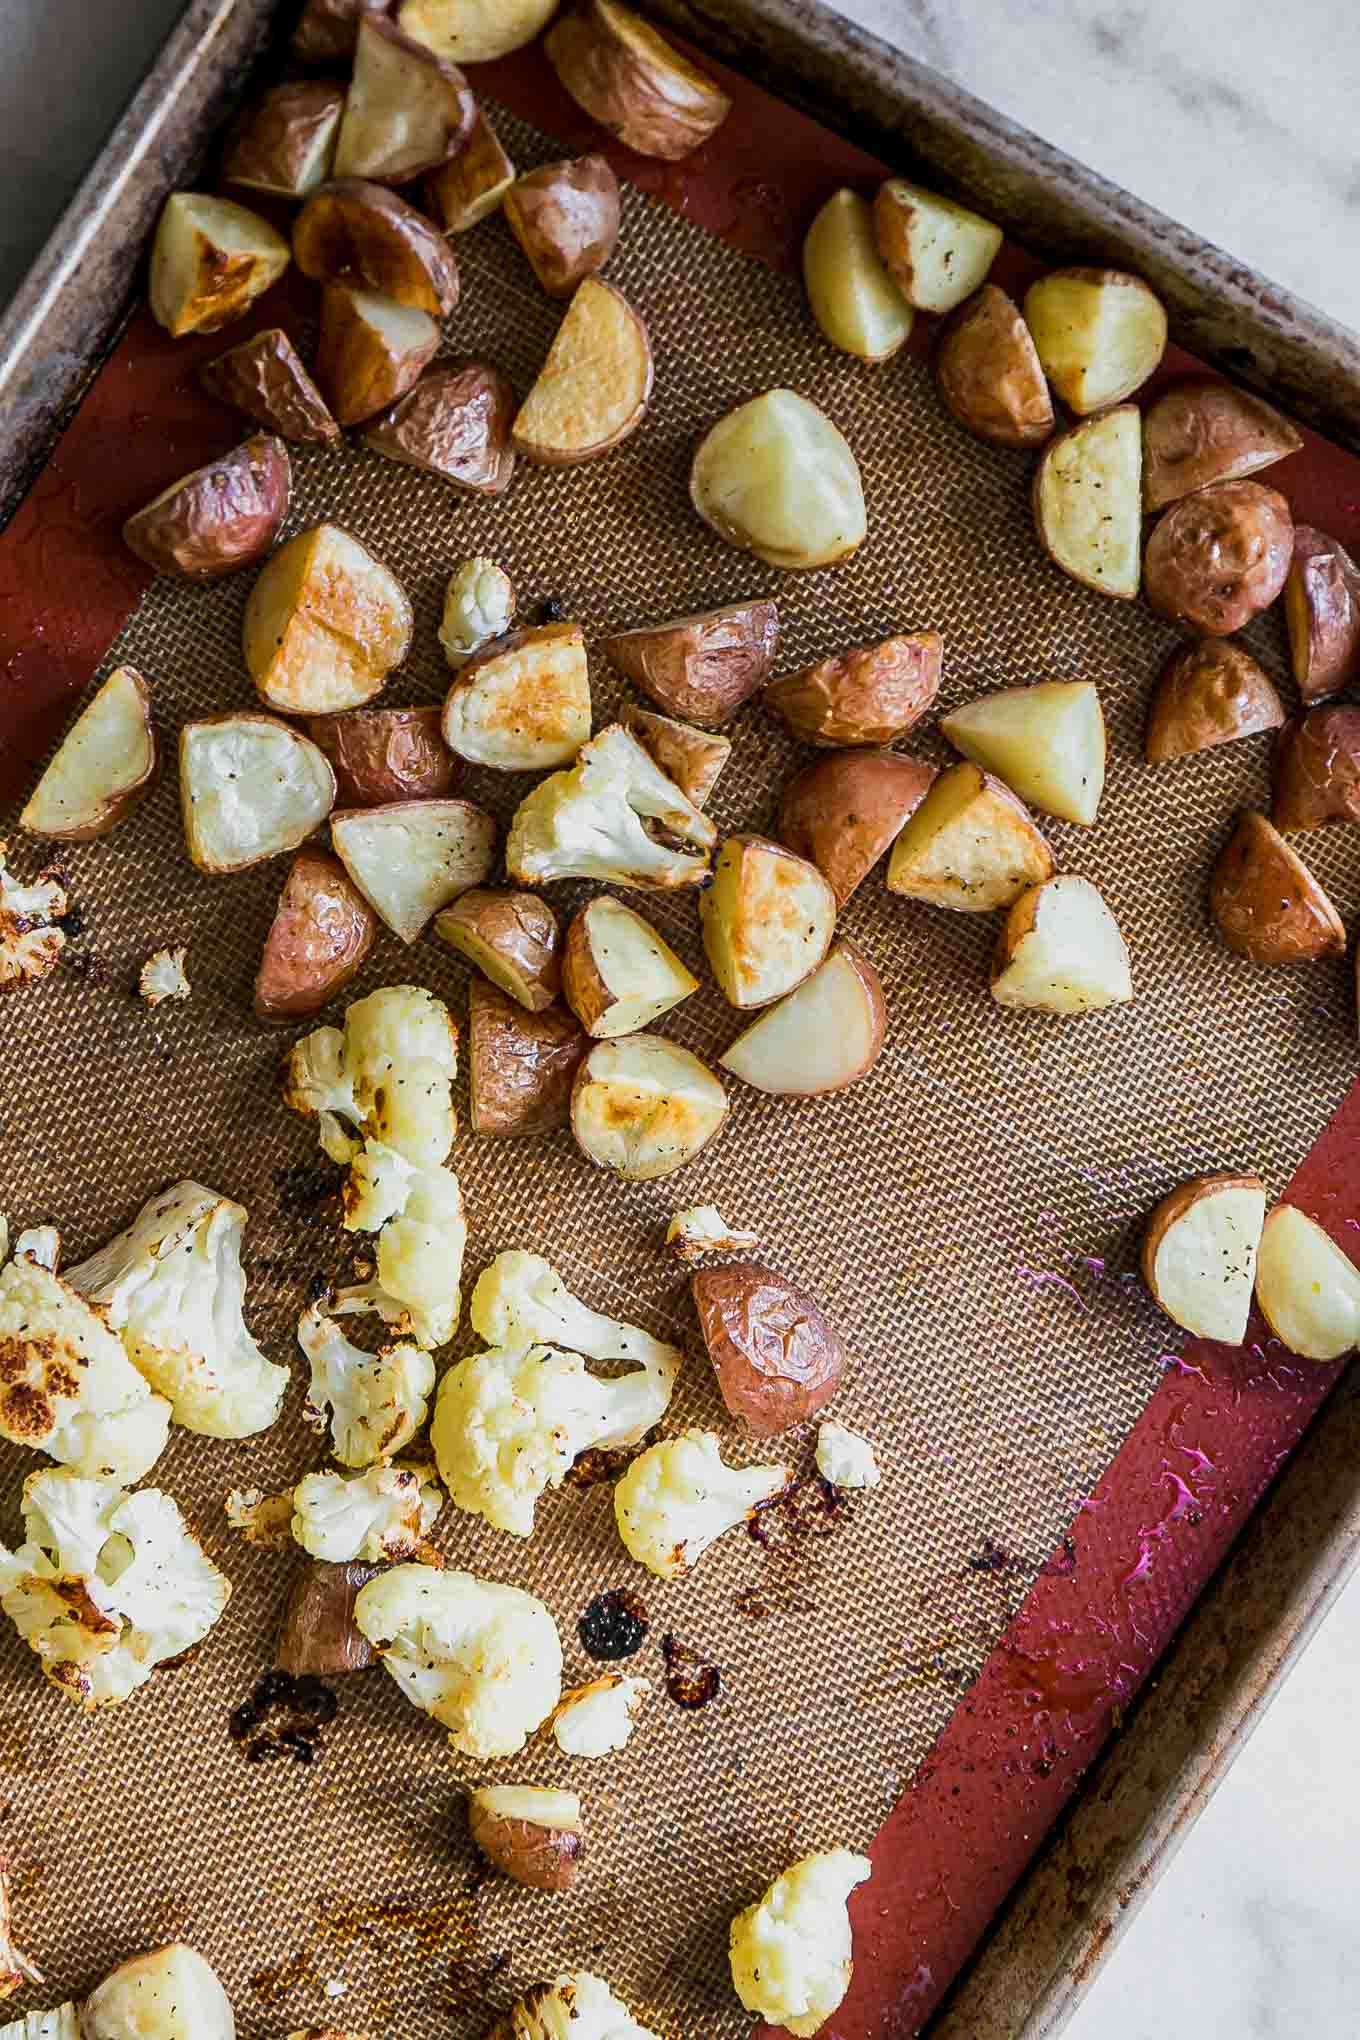 roasted potatoes and cauliflower on a baking sheet after roasting